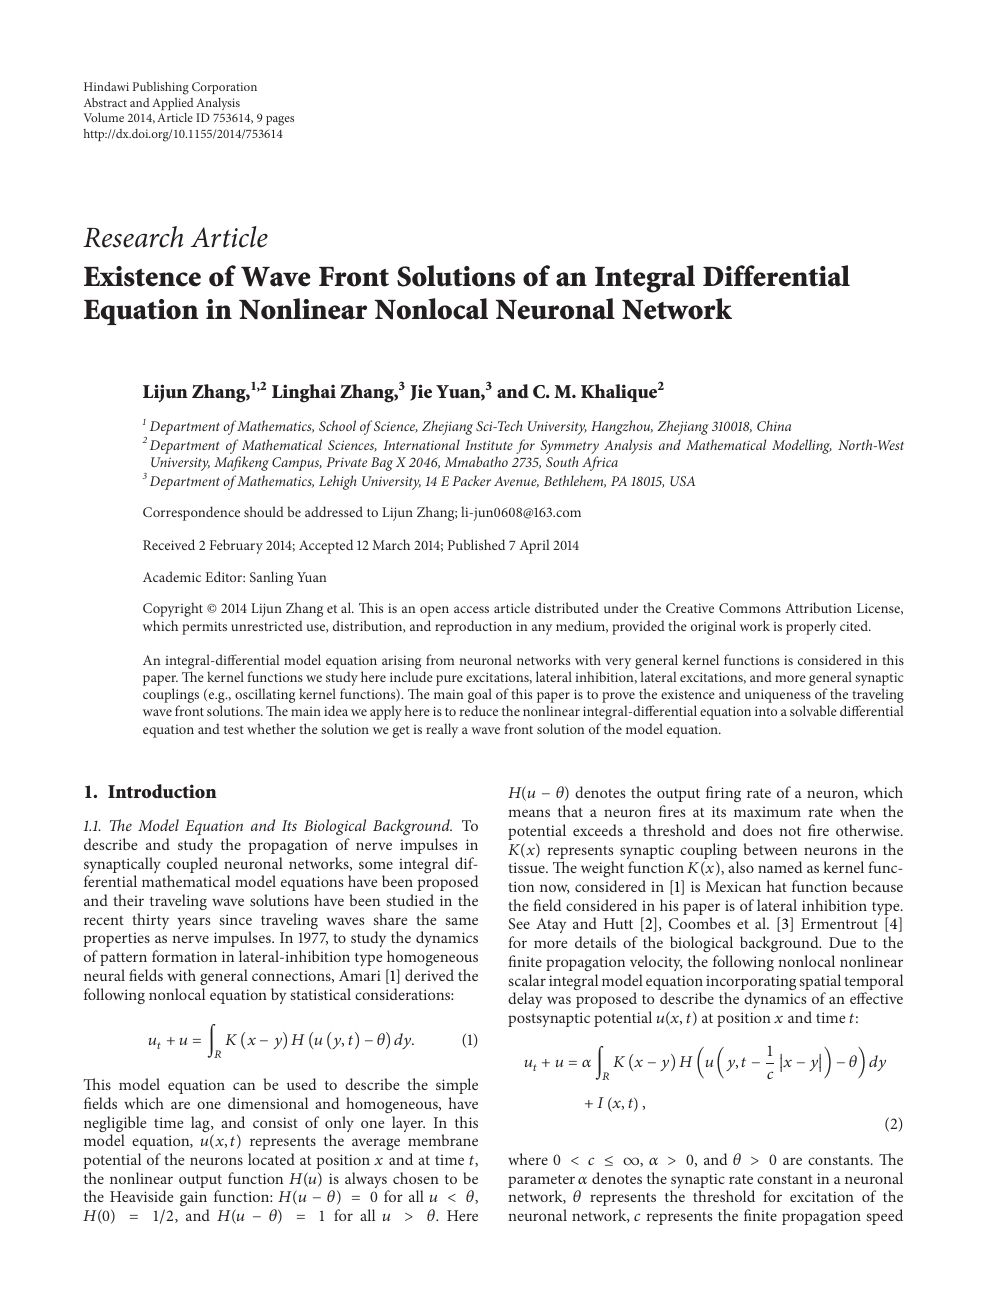 Existence Of Wave Front Solutions Of An Integral Differential Equation In Nonlinear Nonlocal Neuronal Network Topic Of Research Paper In Mathematics Download Scholarly Article Pdf And Read For Free On Cyberleninka